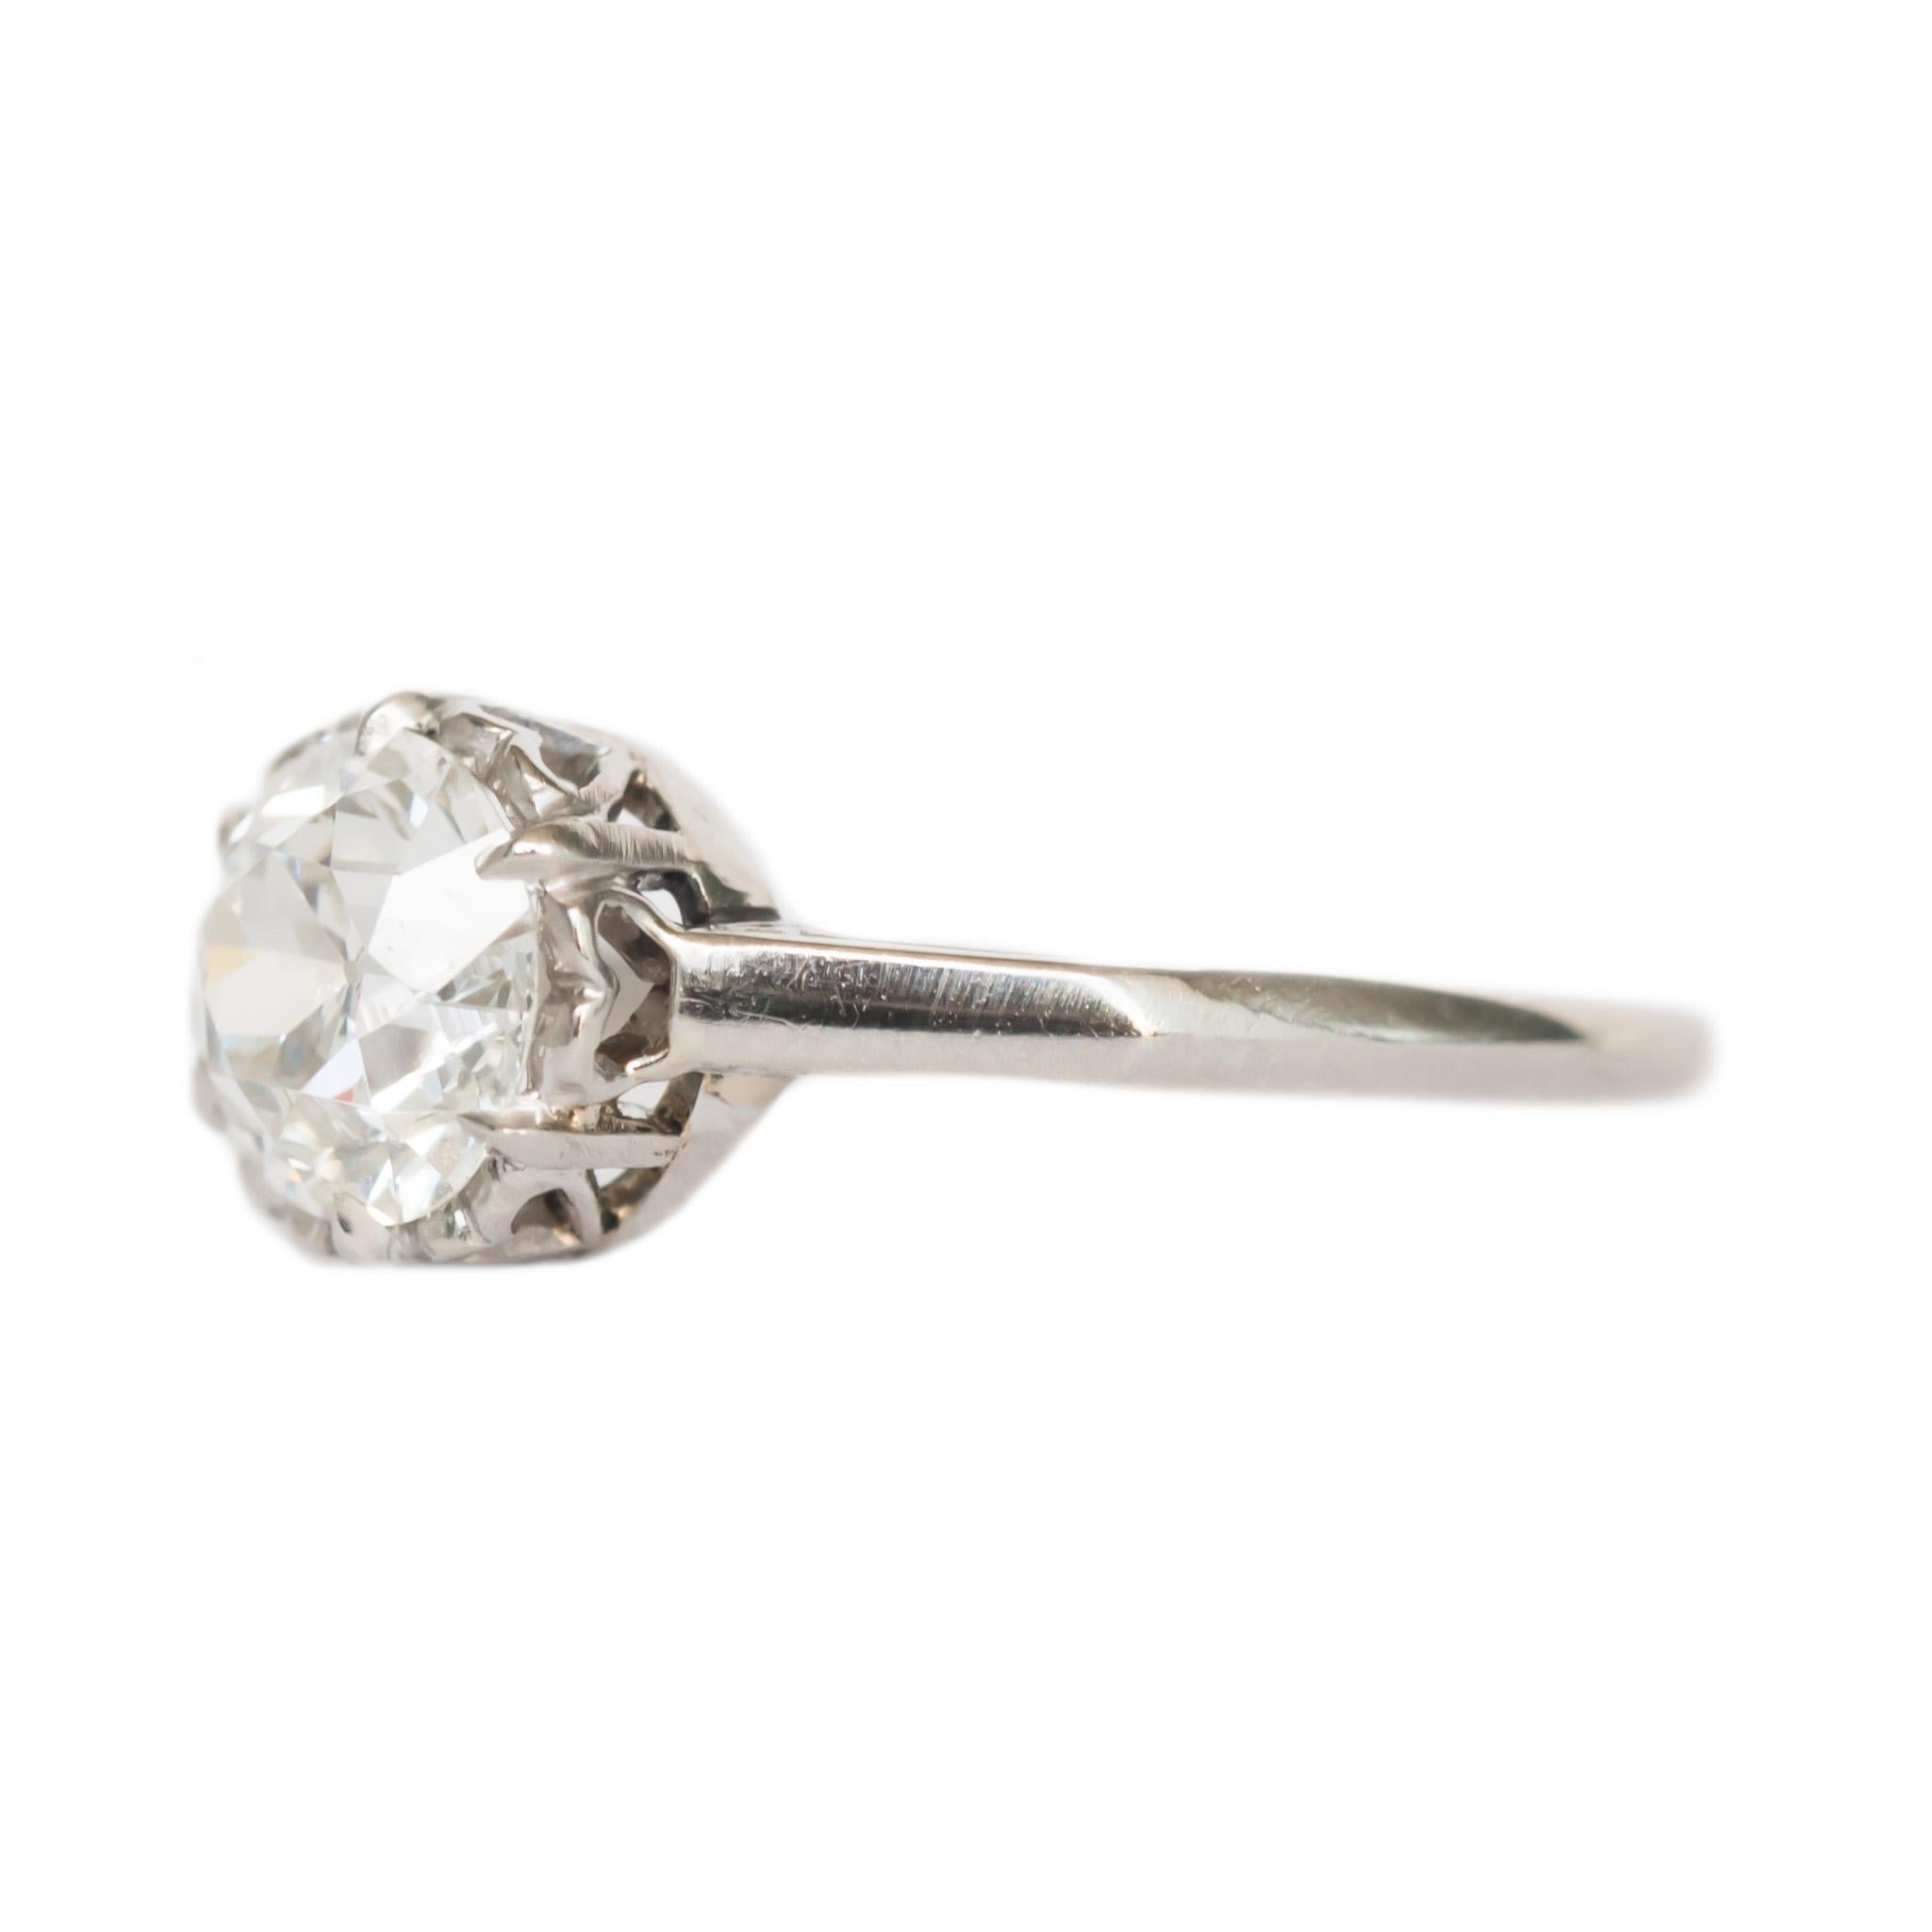 Ring Size: 8
Metal Type: Platinum  [Tested]
Weight:  3.0 grams

Center Stone Details:
GIA REPORT #: 5202567489
Weight: 1.10 carat
Cut: Old European Brilliant
Color: H
Clarity: SI2

Finger to Top of Stone Measurement: 5.5MM
Condition:  Excellent